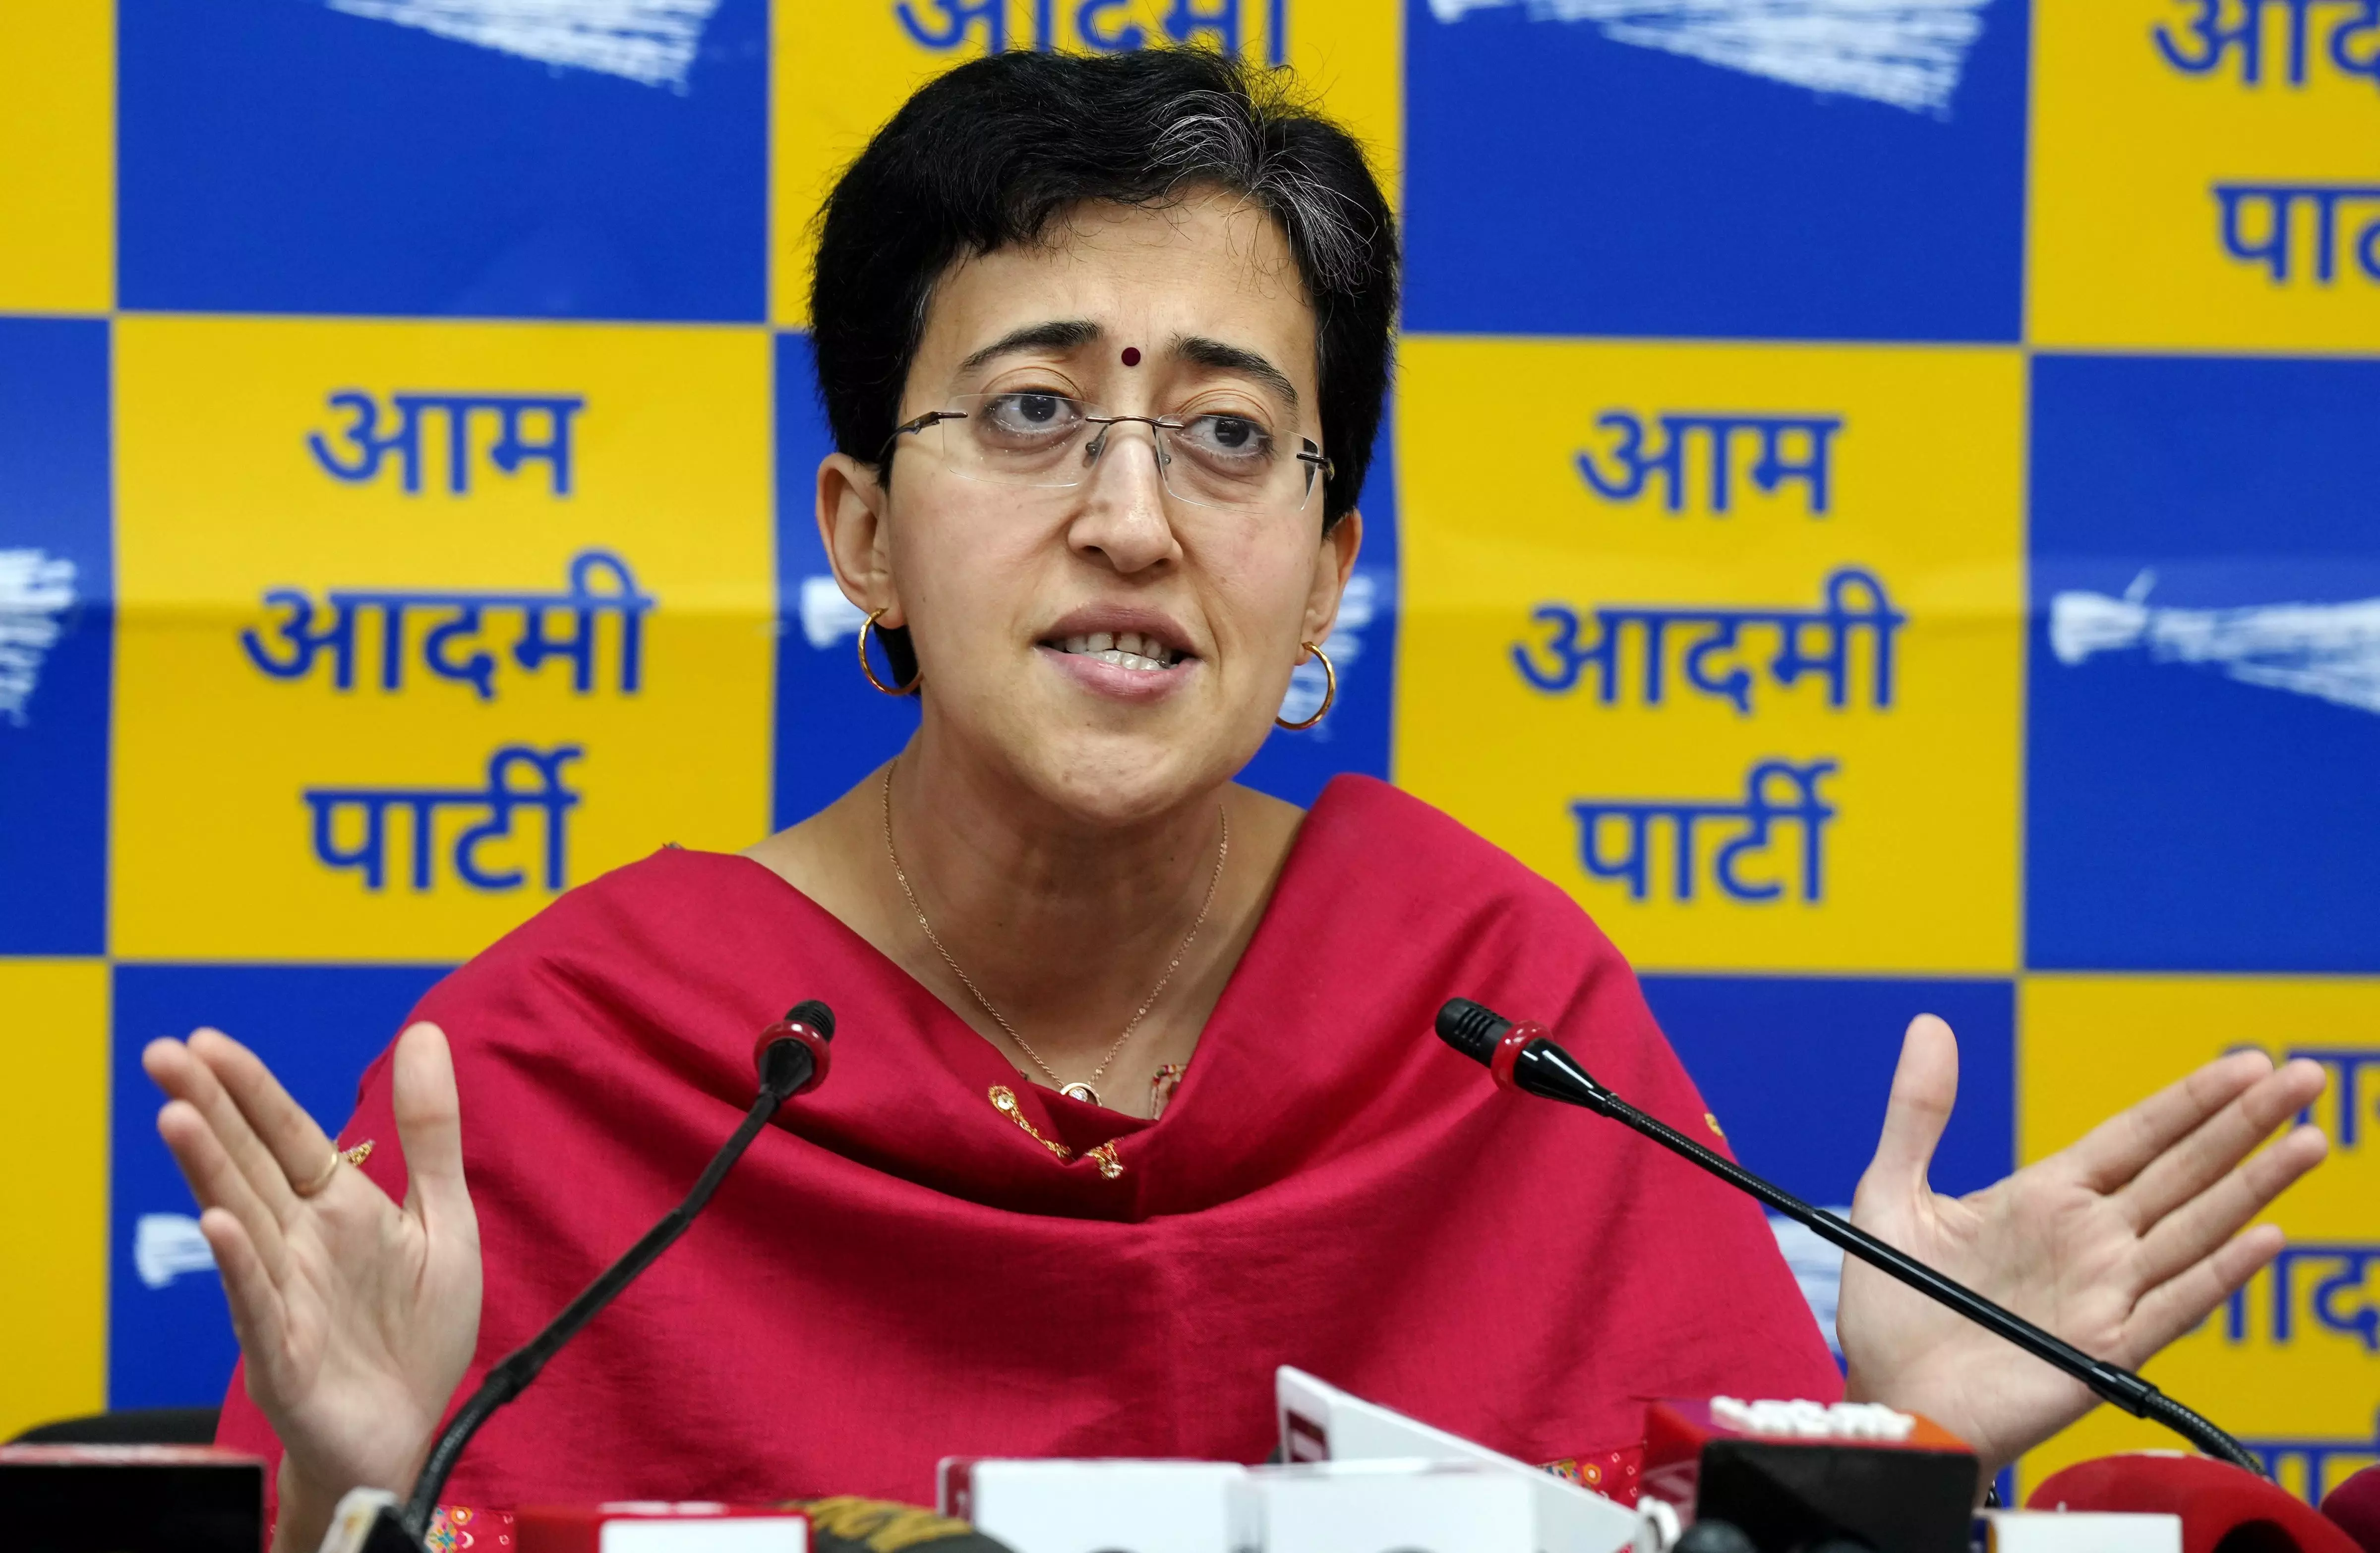 Kejriwals arrest may yield electoral benefits for AAP, getting lot of sympathy fom people: Atishi